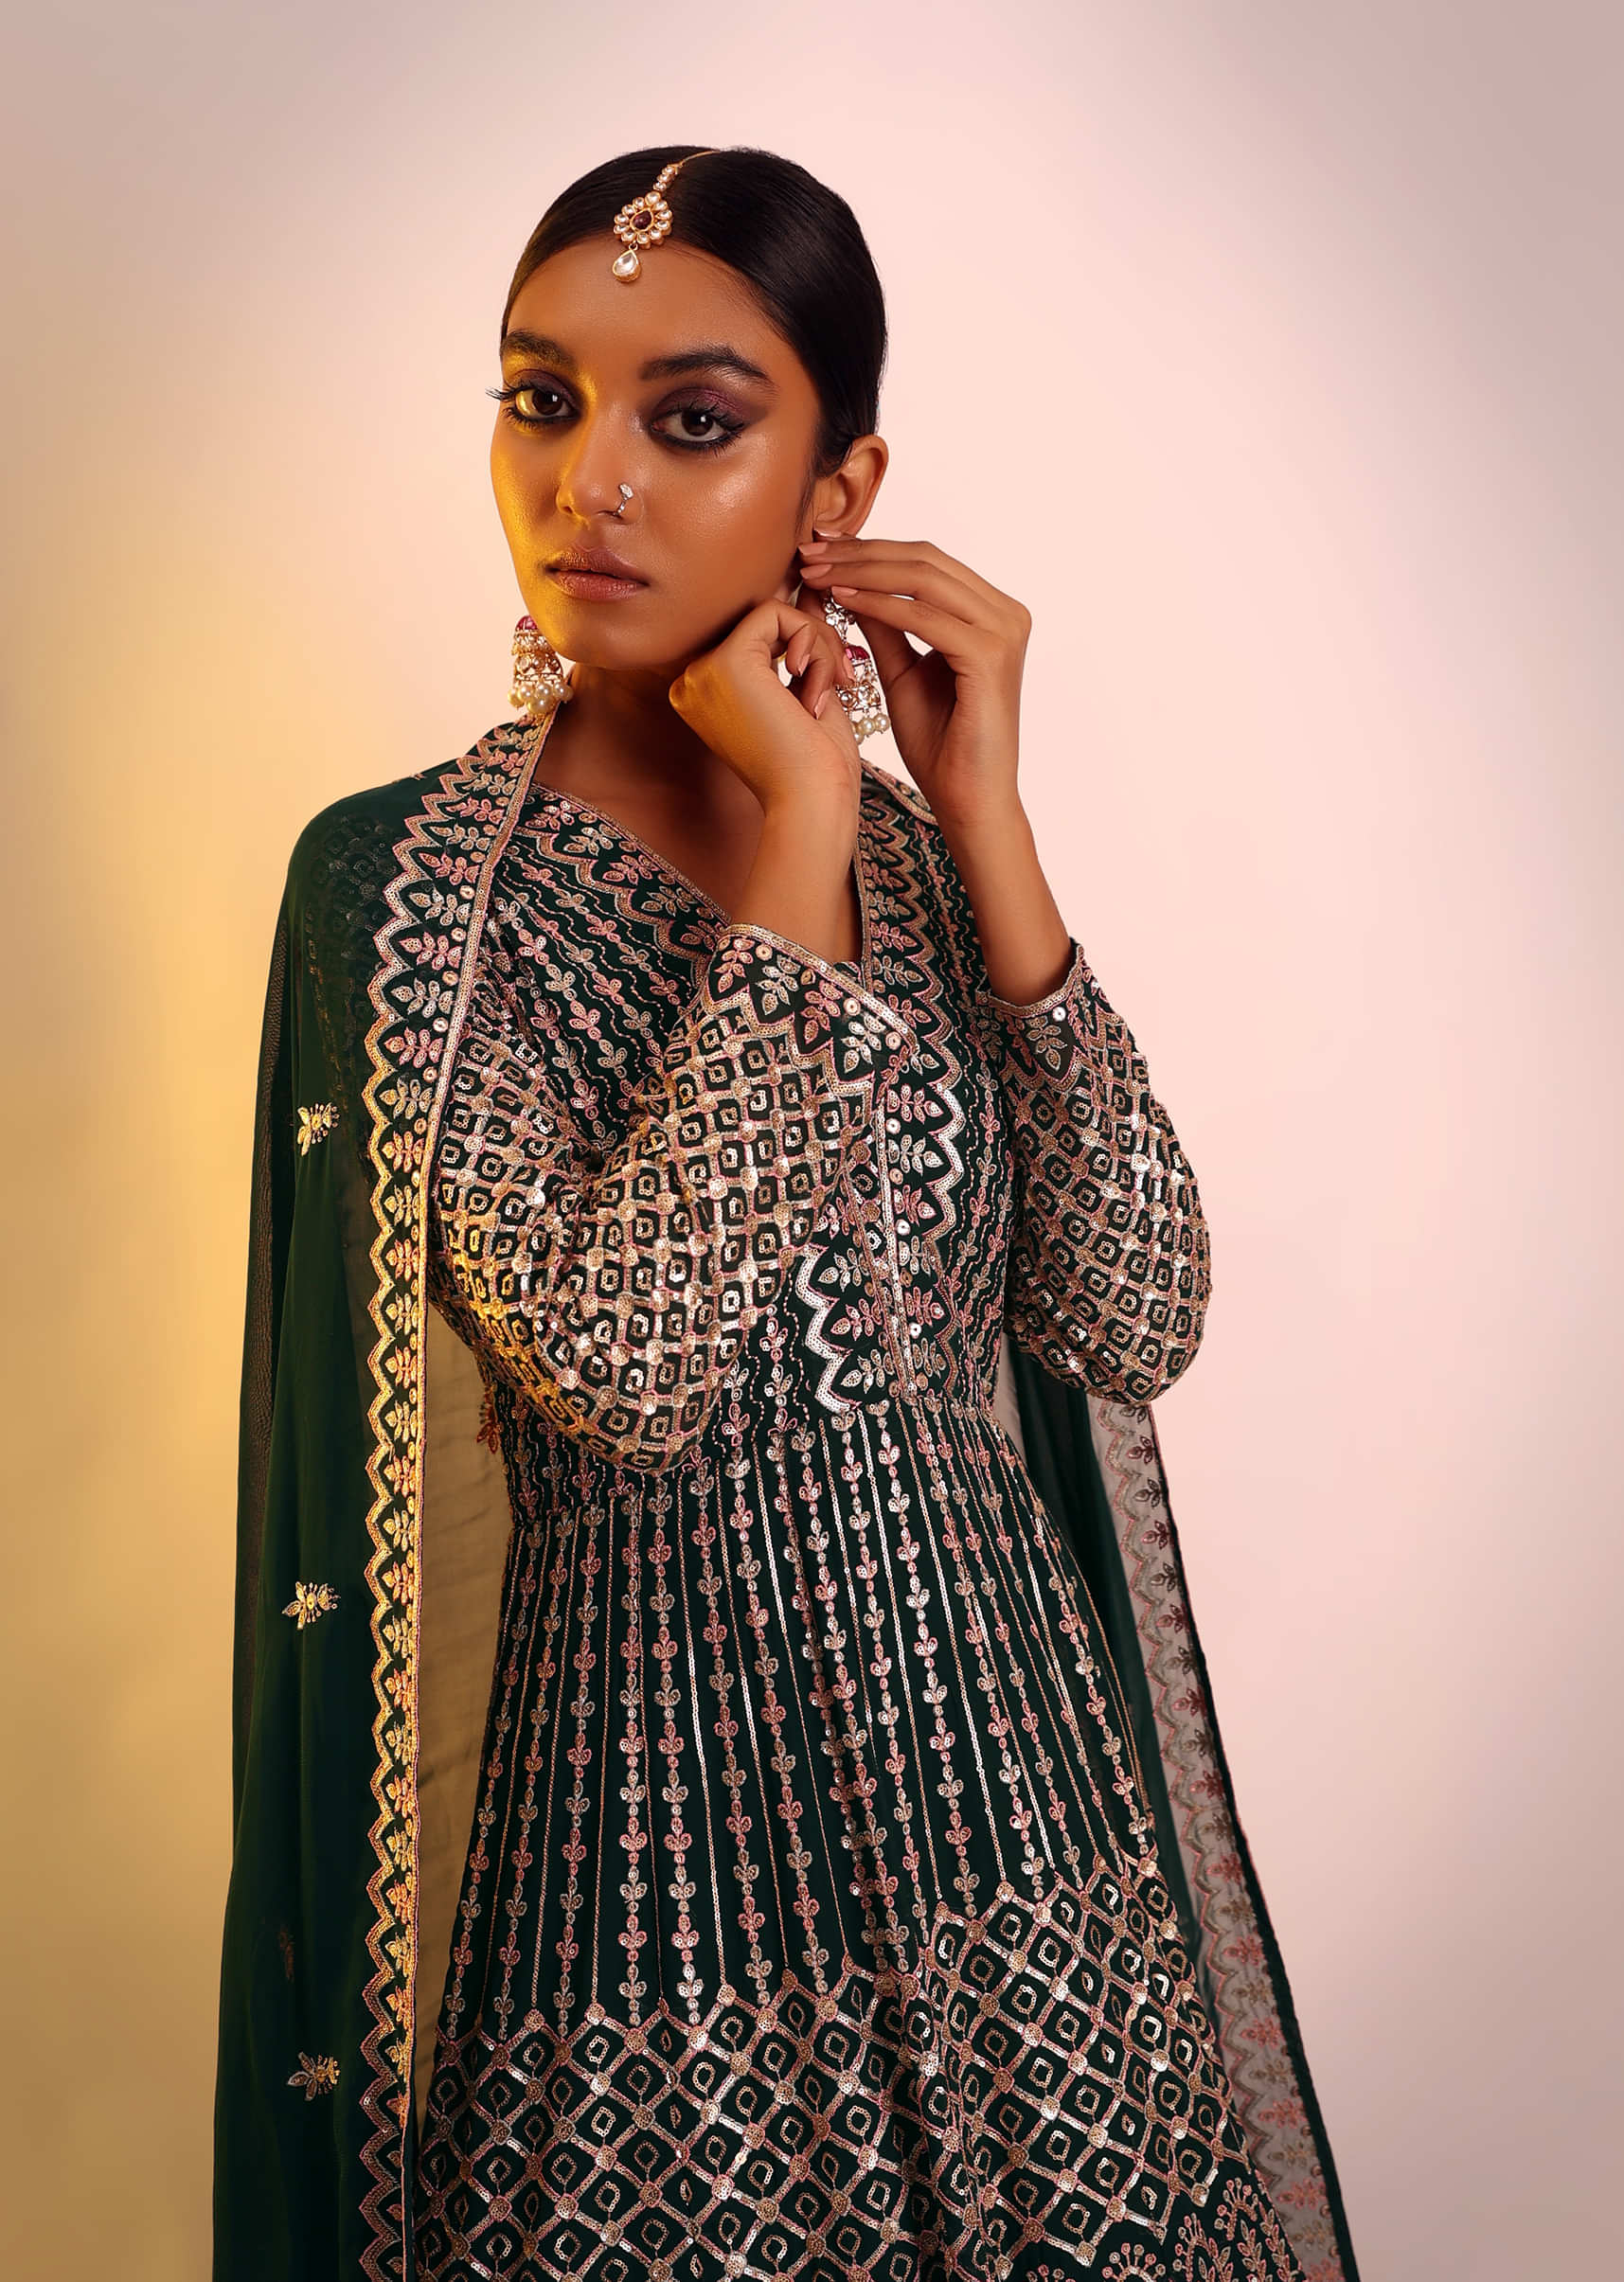 Bottle Green Anarkali Suit In Georgette With Multi Colored Resham And Sequins Embroidered Intricate Mughal Motifs